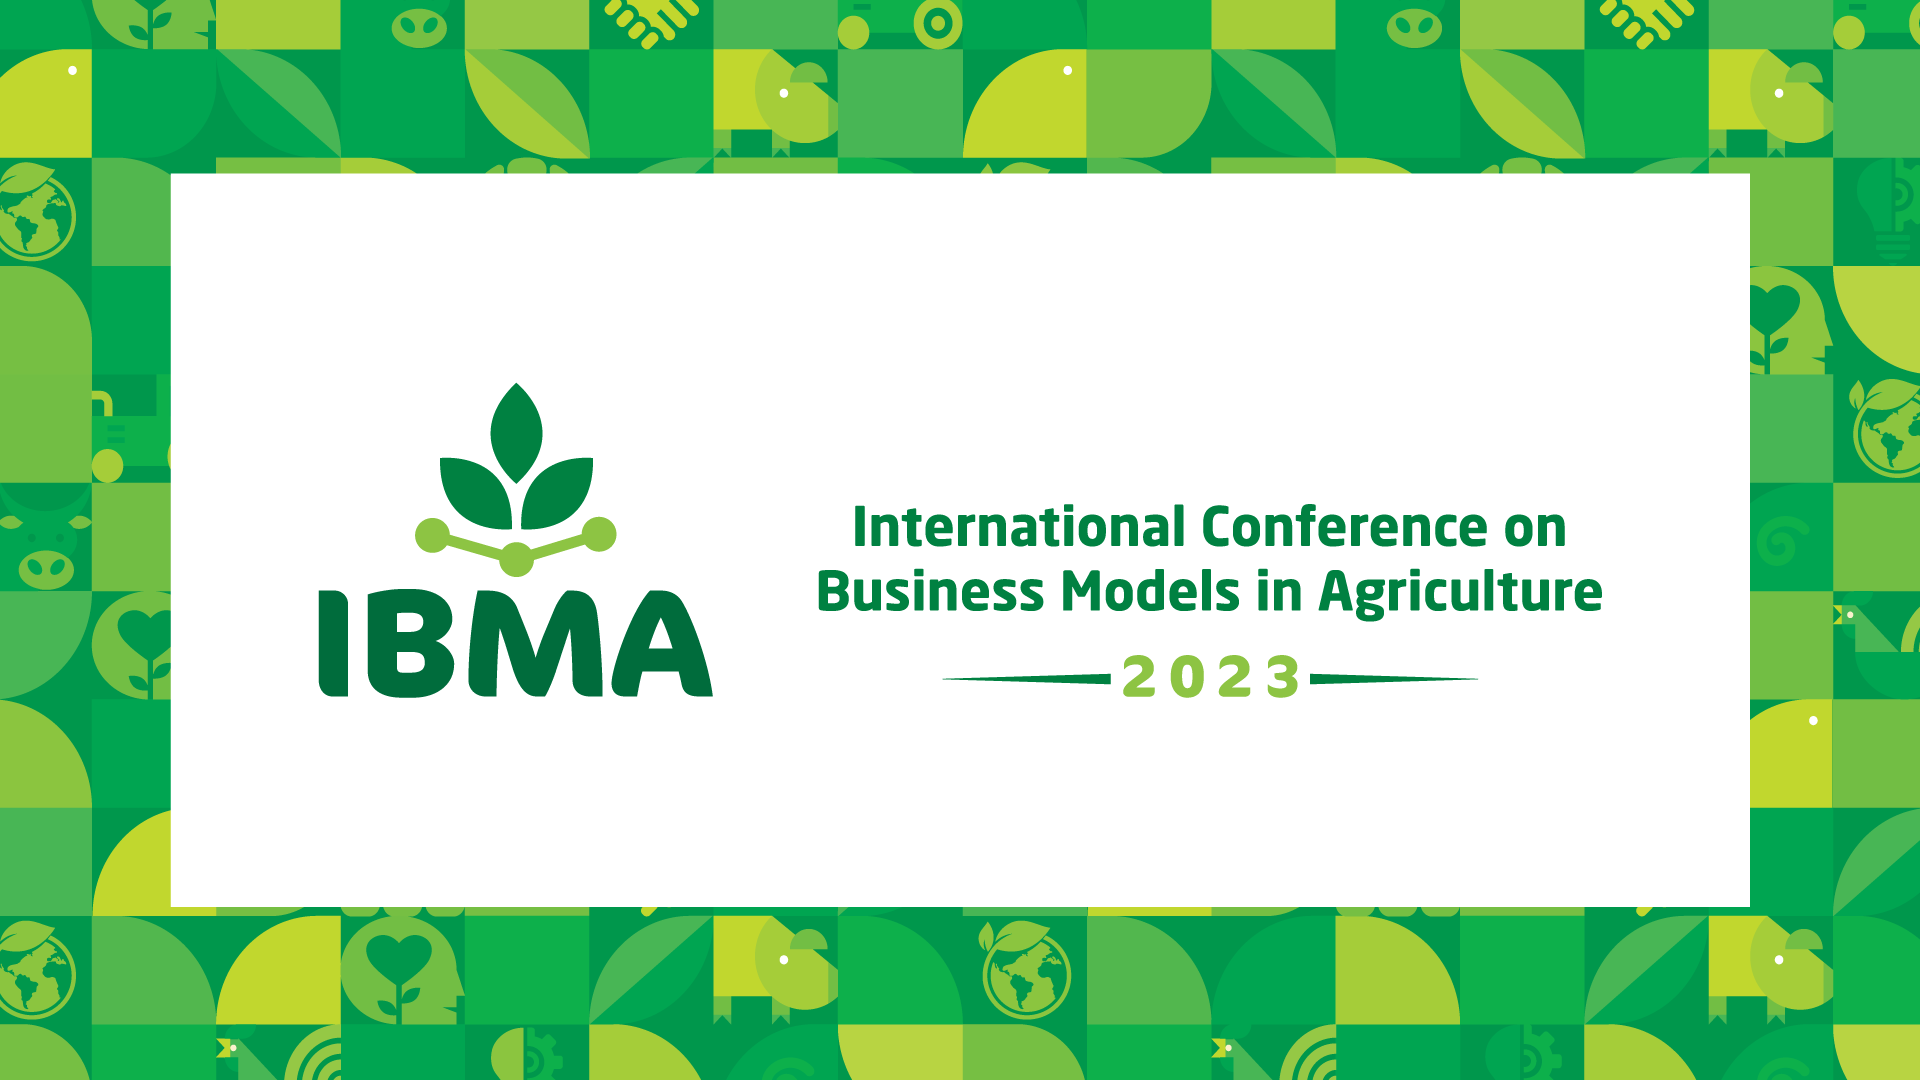 IBMA 2023 The International Conference on Business Models in